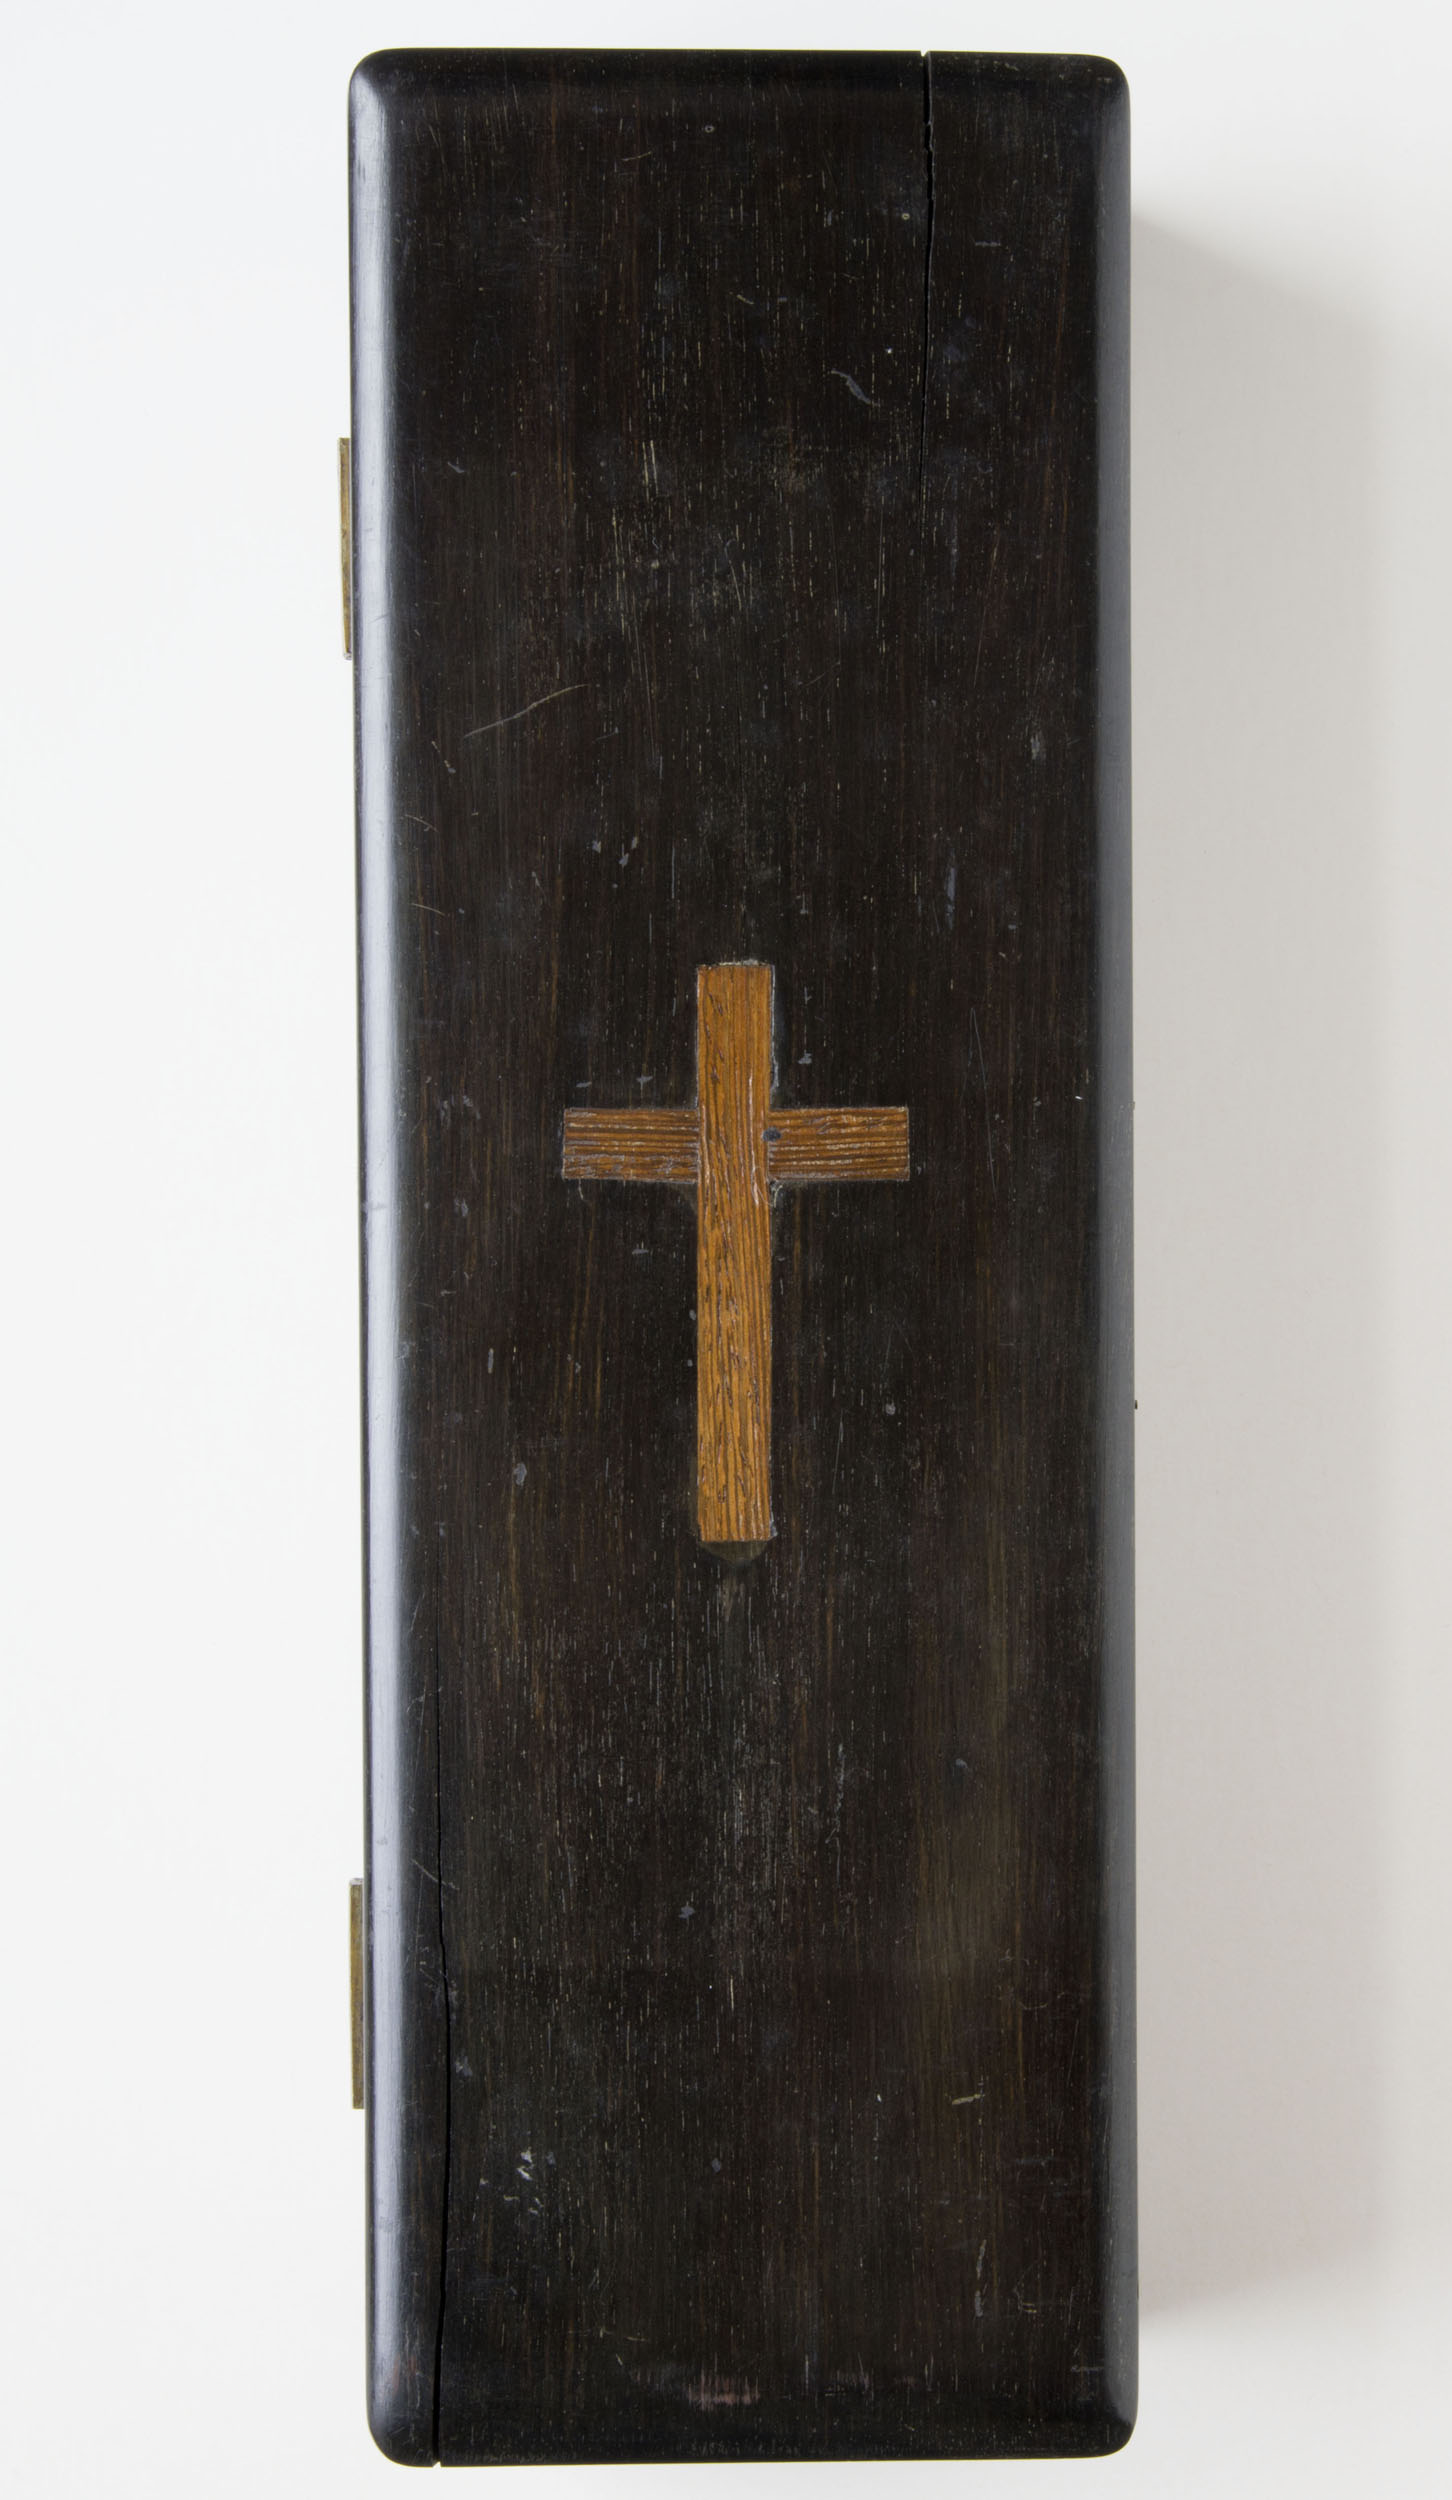 Wooden Box with Inset Cross, Made with Wood from Mary Livingstone's Grave, [After 1862]. Copyright David Livingstone Centre. Object images used by permission. May not be reproduced without the express written consent of the National Trust for Scotland, on behalf of the Scottish National Memorial to David Livingstone Trust.